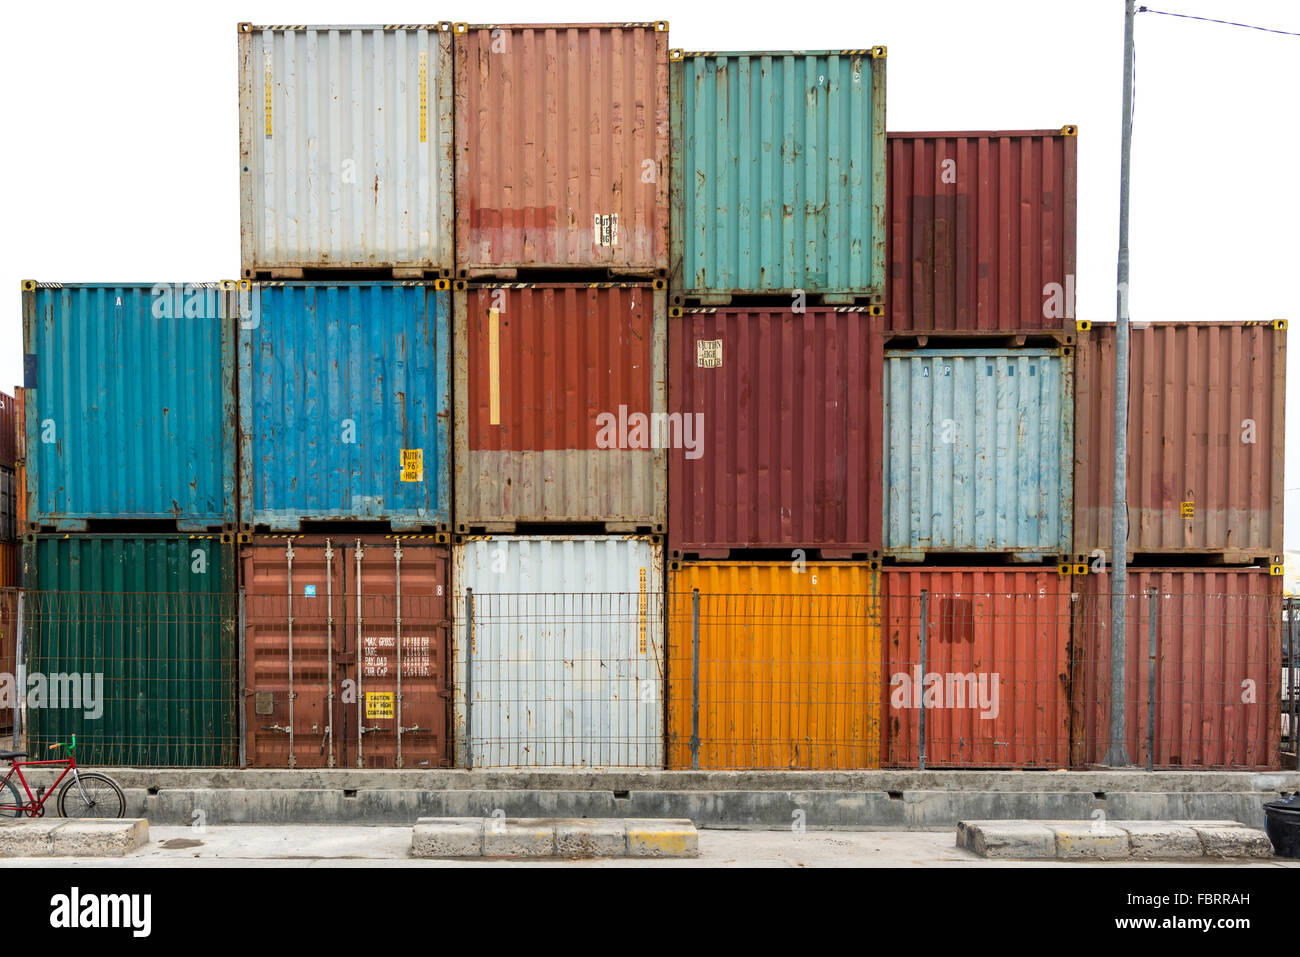 ISO shipping containers stacked up at Jakarta old harbour Stock Photo